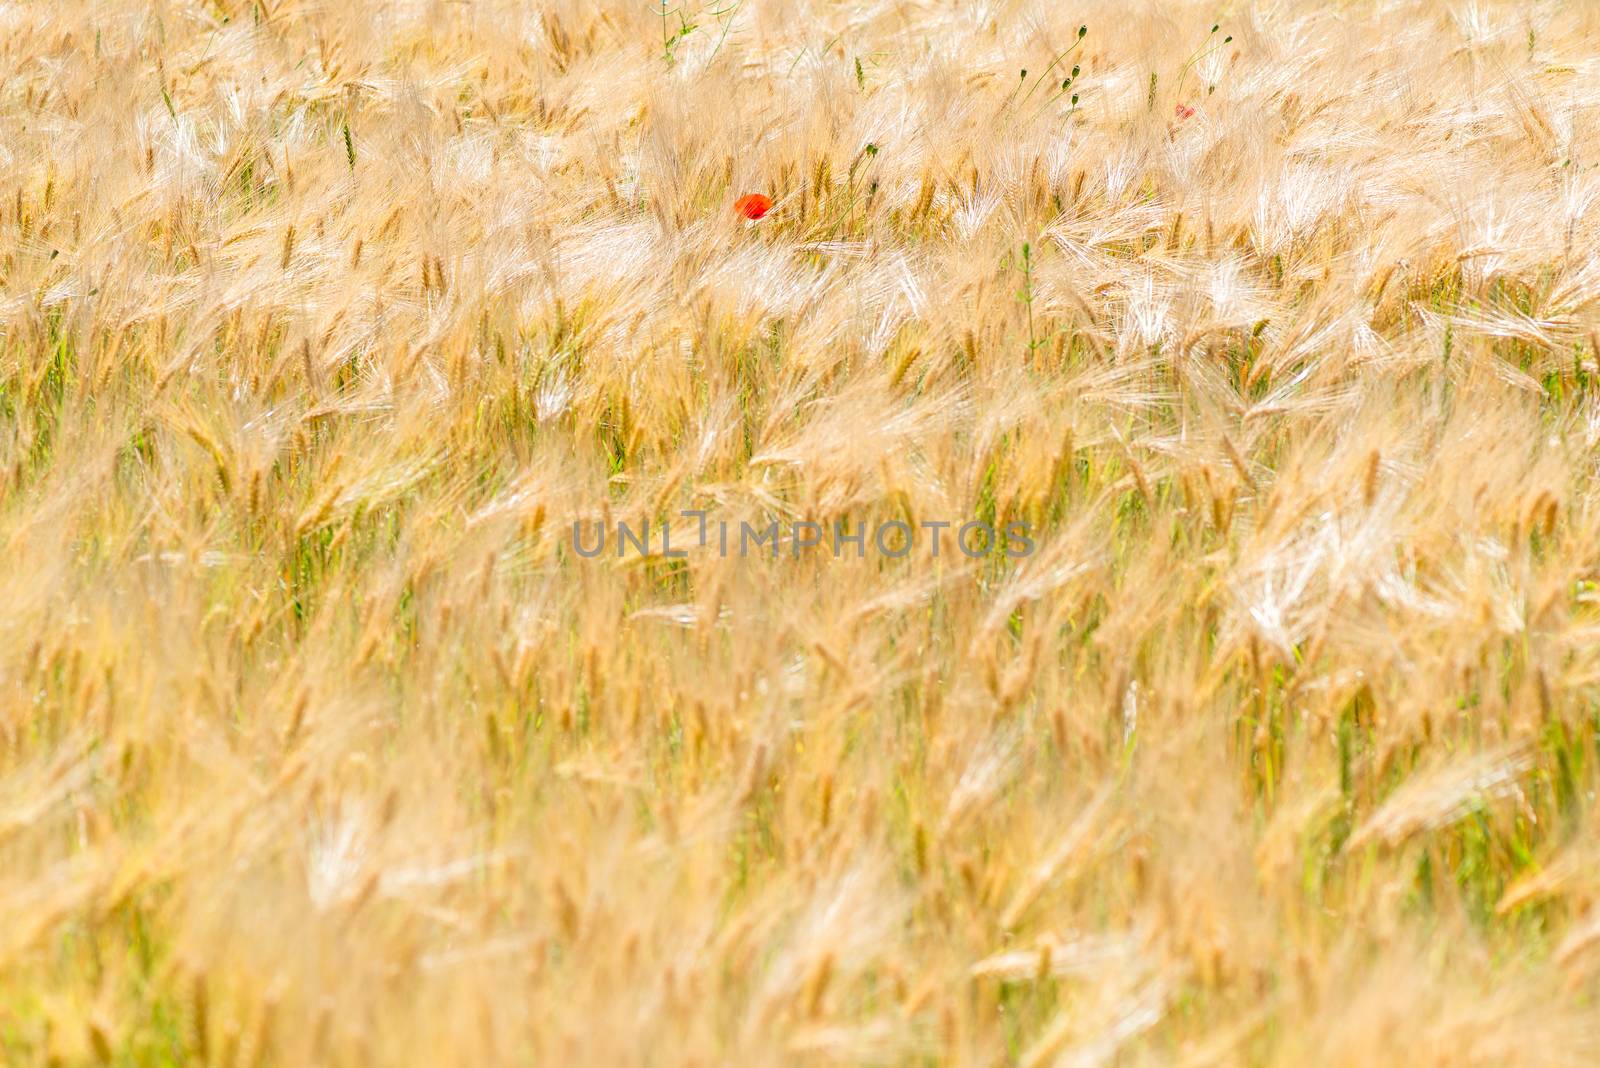 rare poppy flowers in yellow ears of wheat in a field by kosmsos111